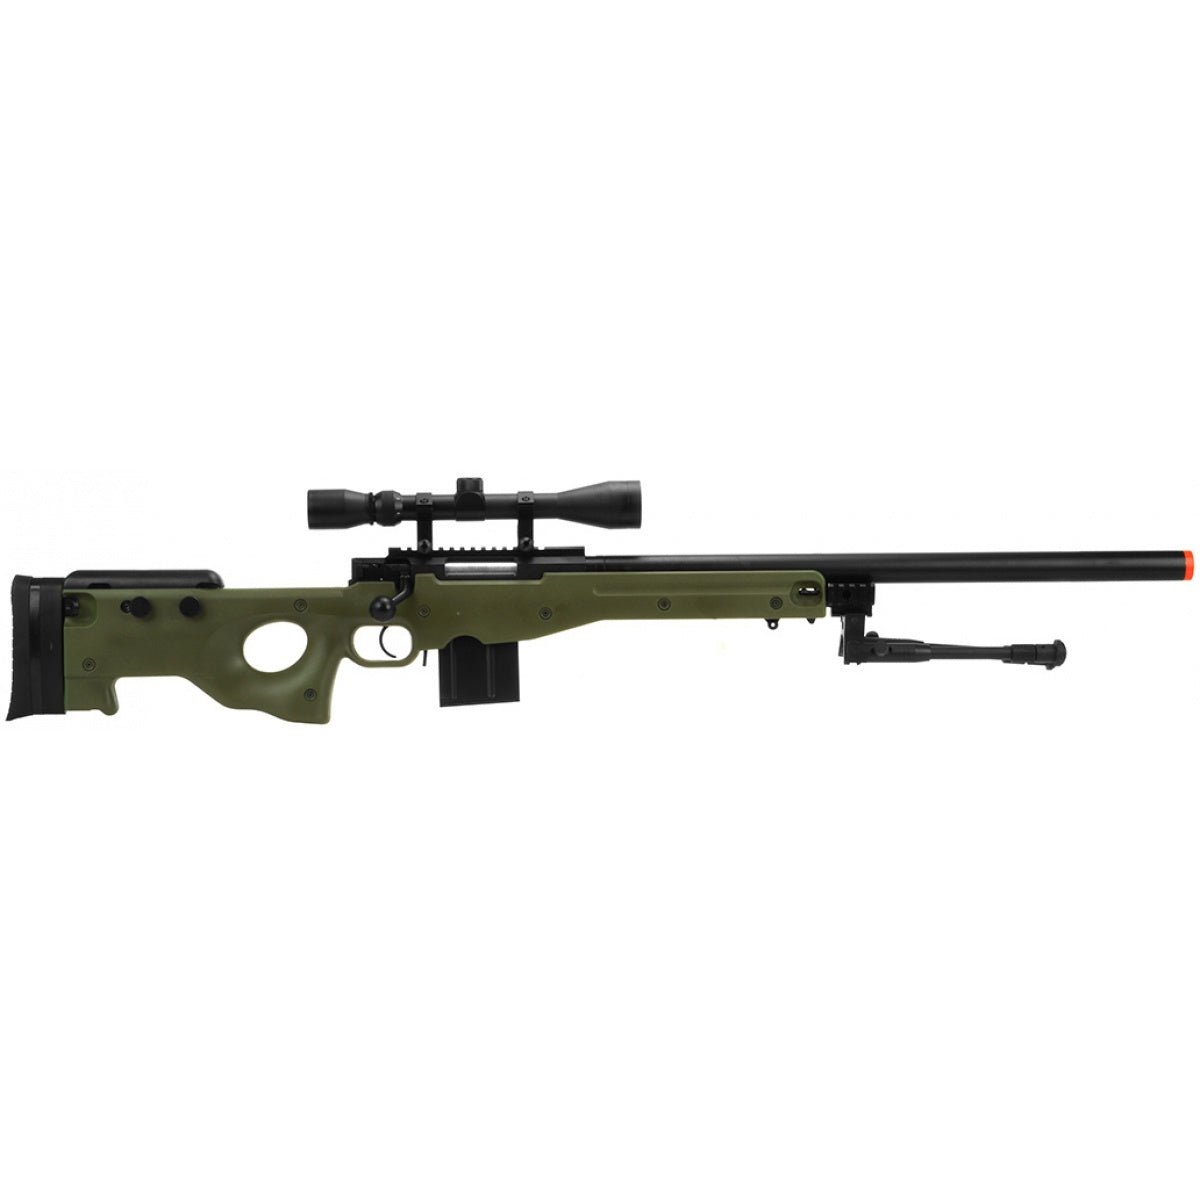 WELLFIRE AIRSOFT L96 AWP BOLT ACTION RIFLE W/ BIPOD AND SCOPE - ssairsoft